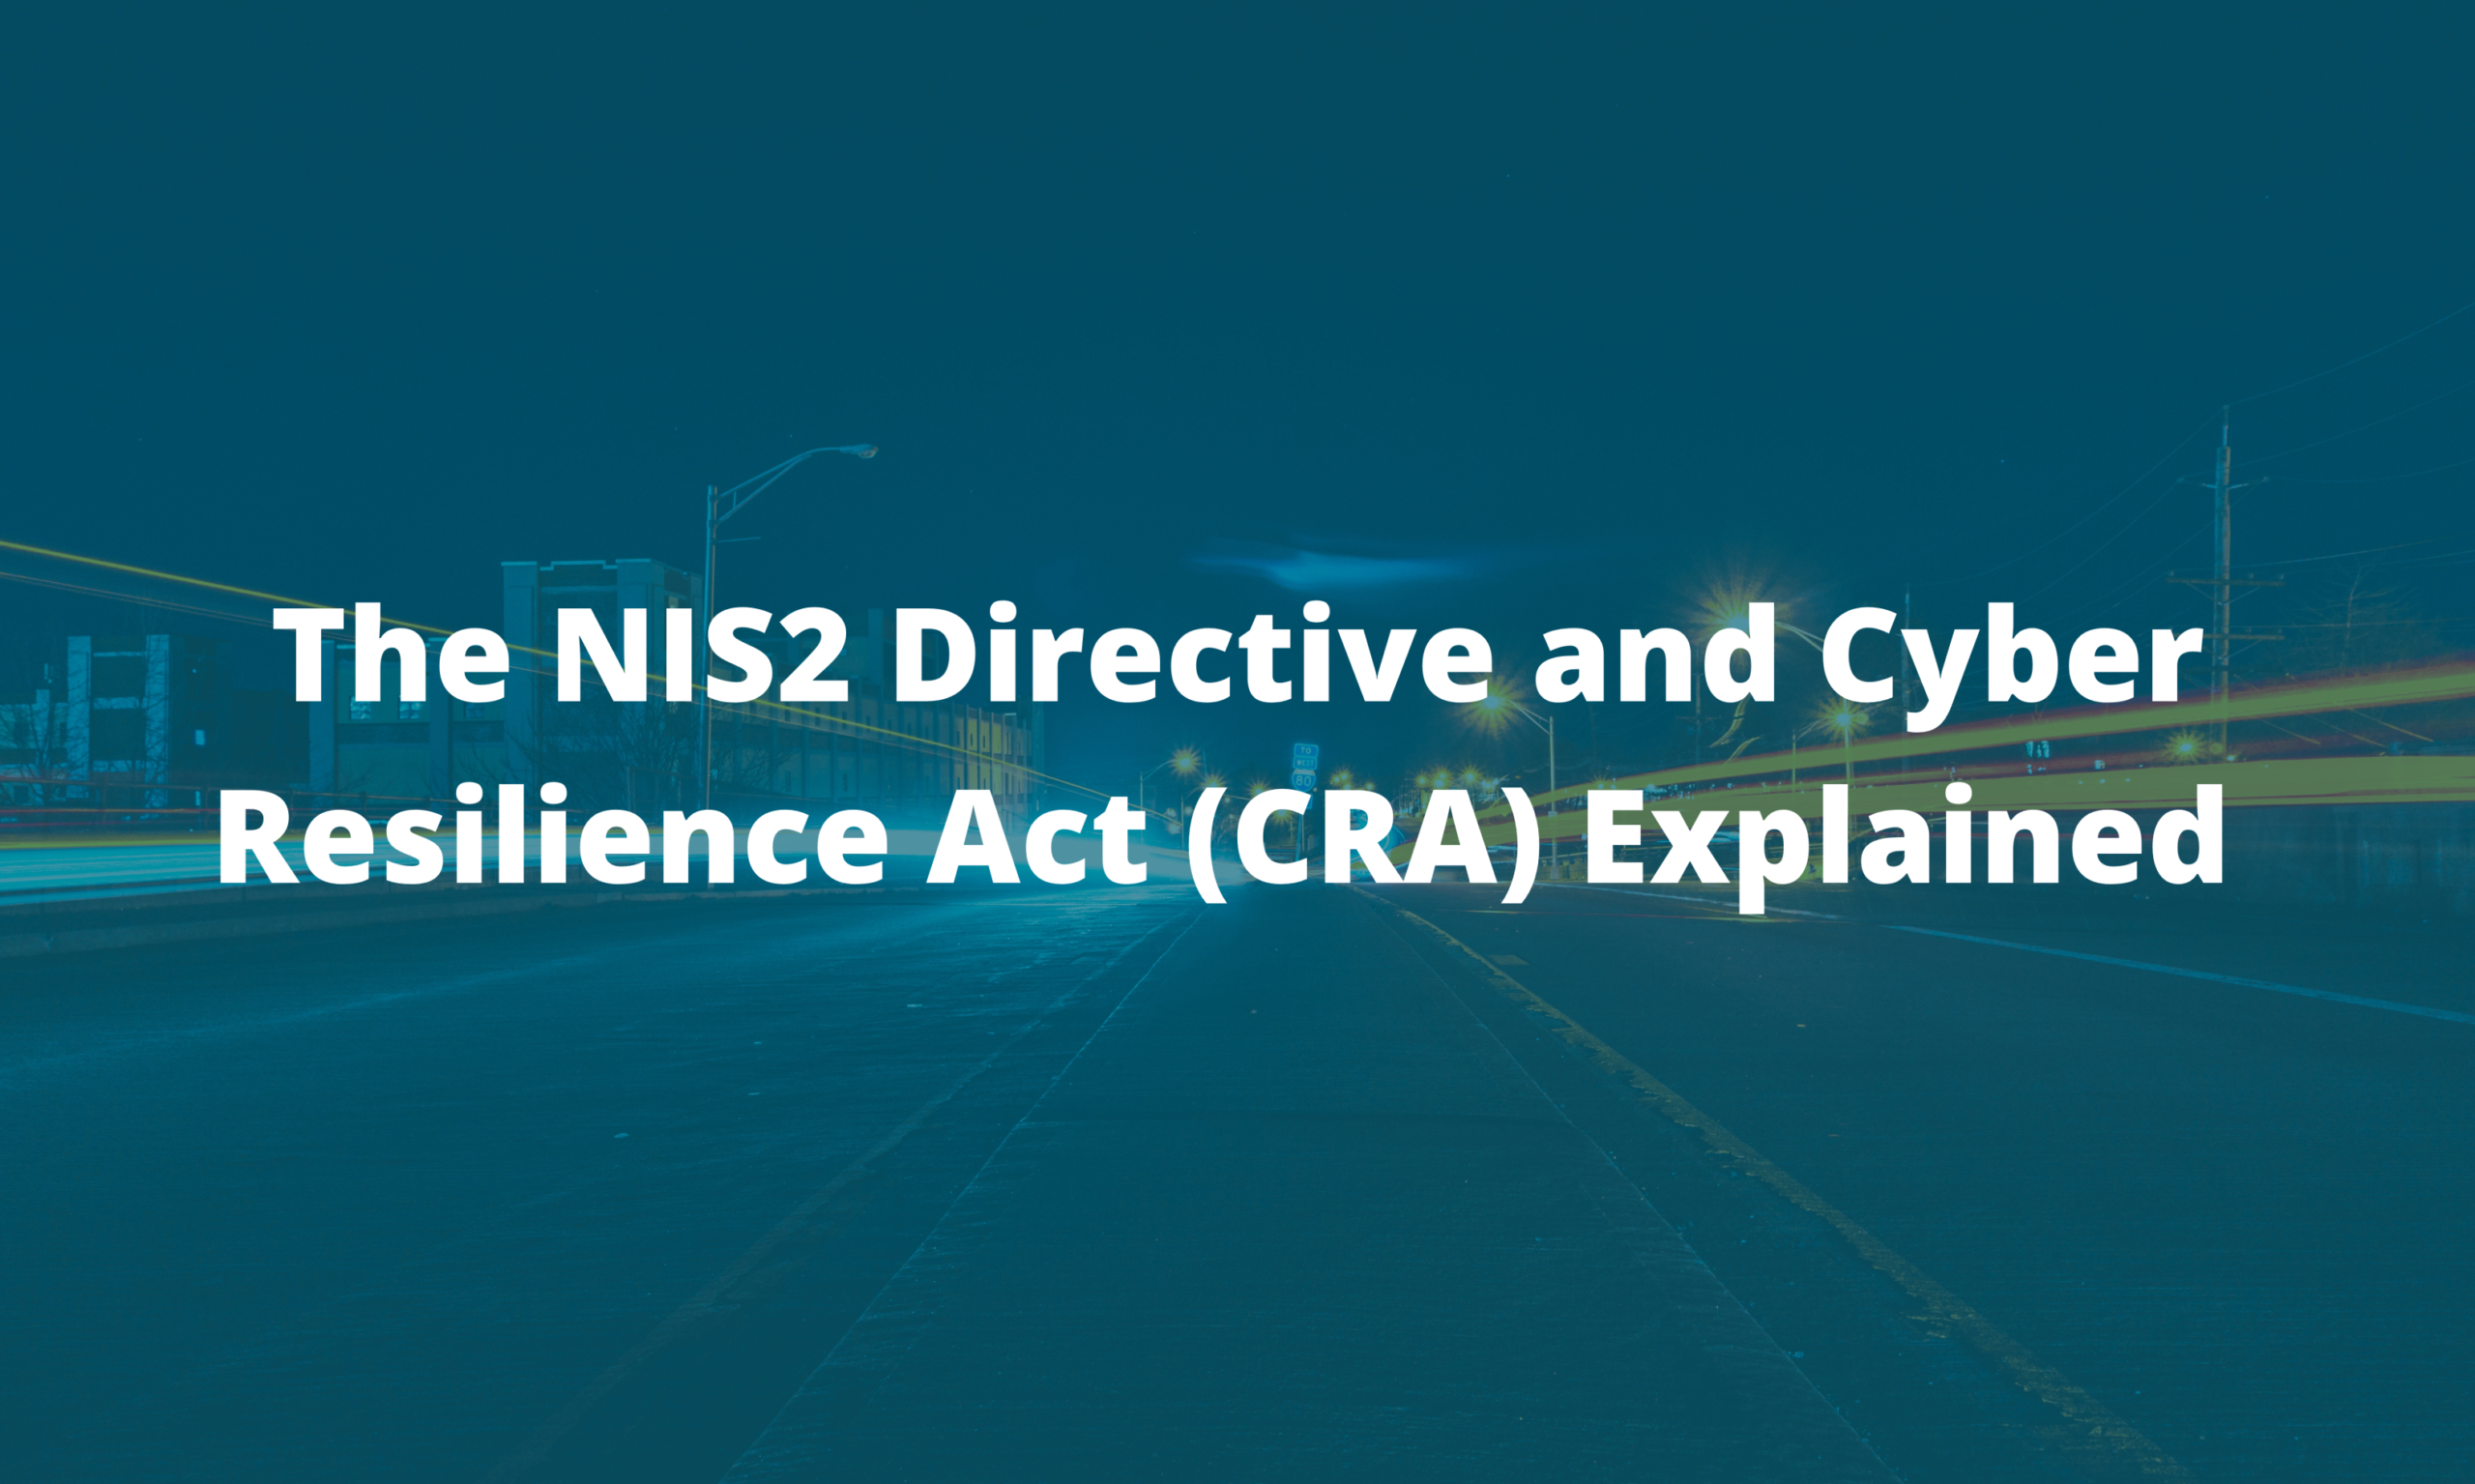 The NIS2 Directive and Cyber Resilience Act (CRA) Explained